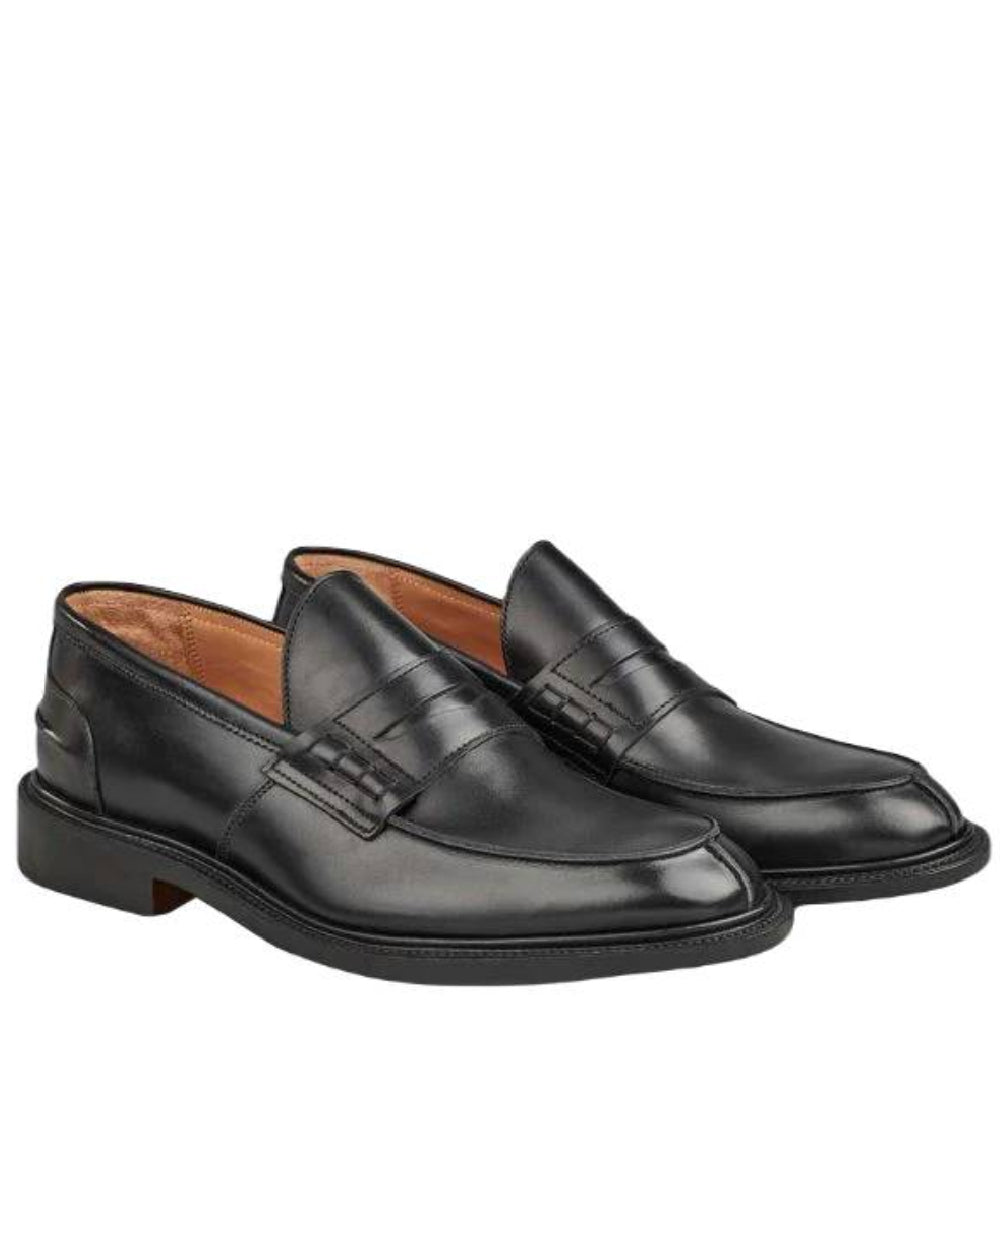 Black Coloured Trickers James Leather Sole Penny Loafer On A White Background 